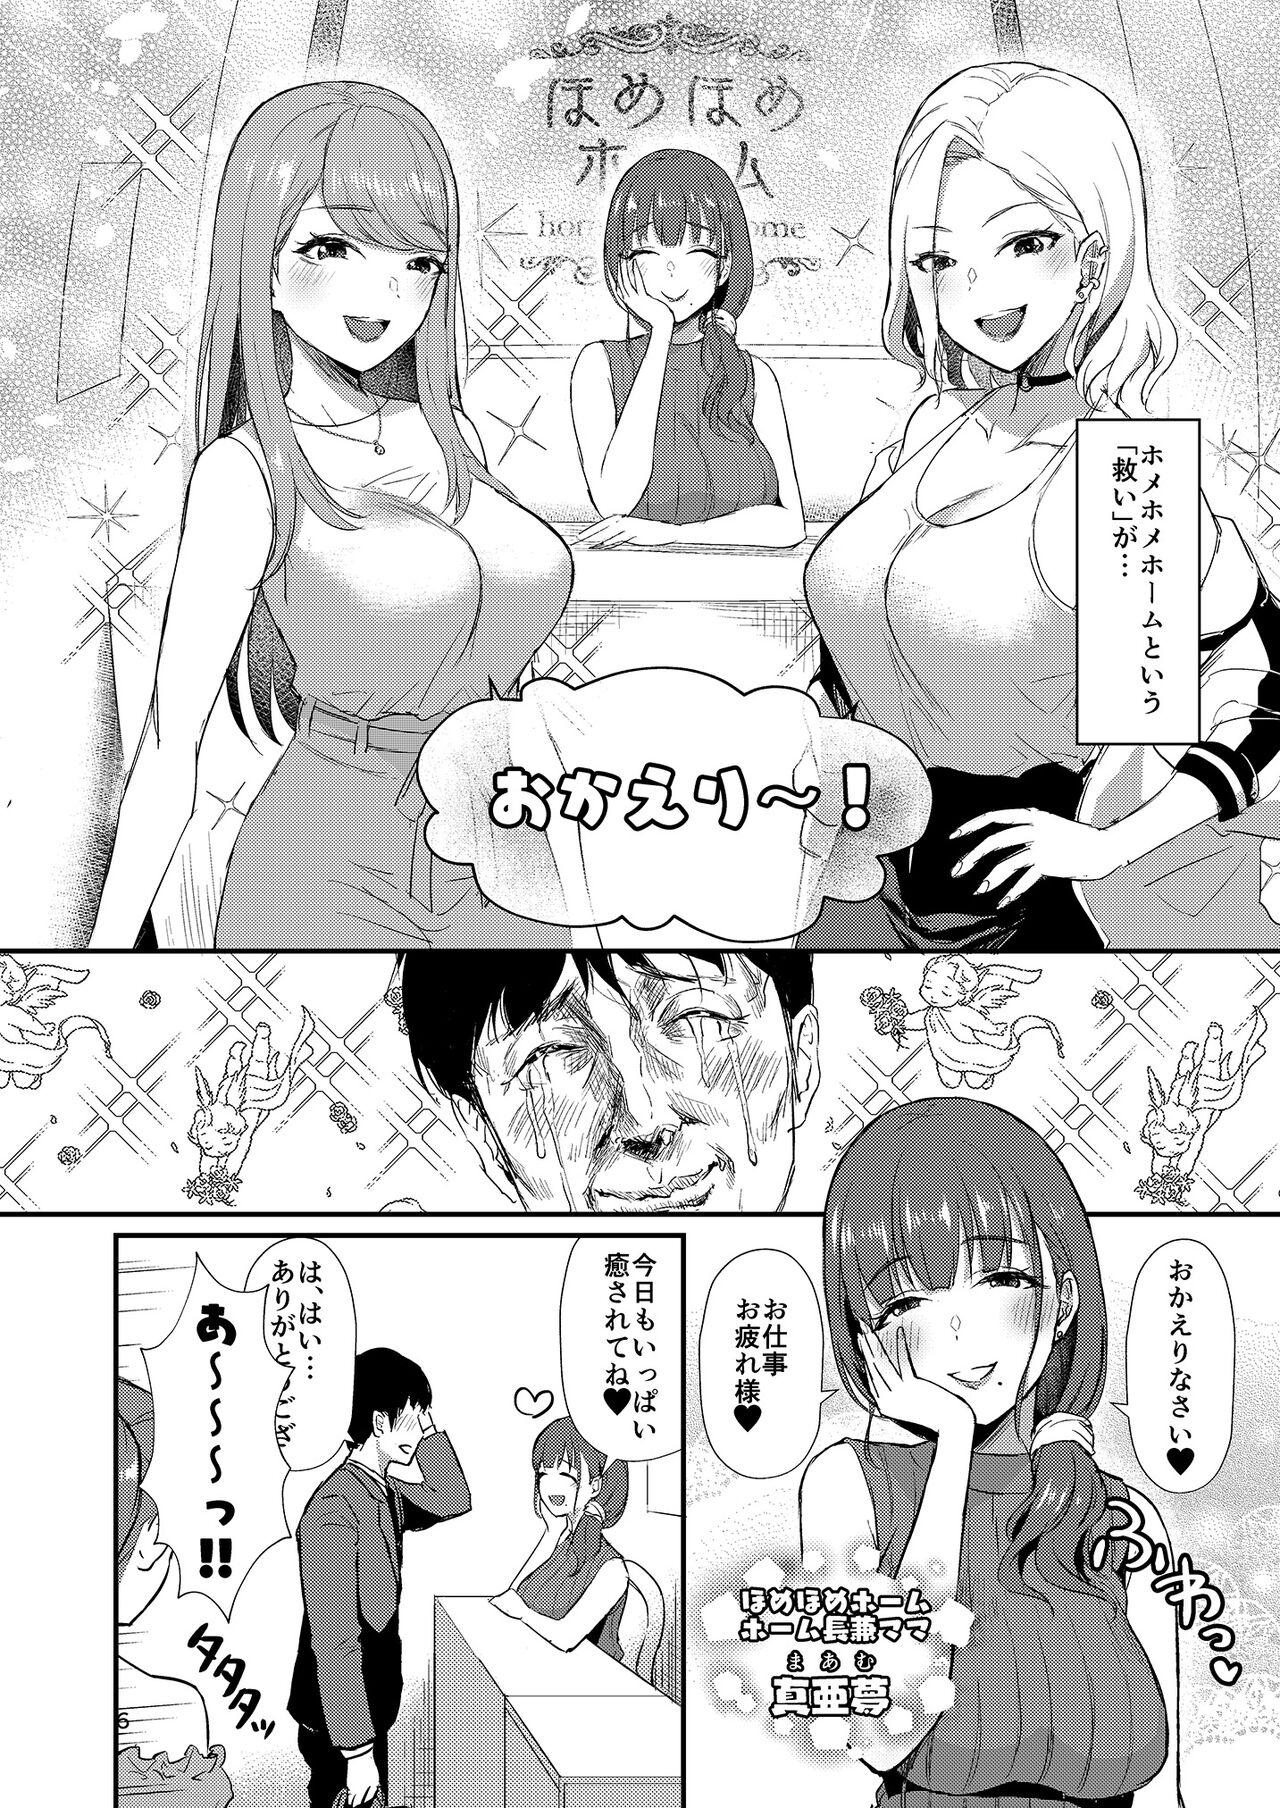 Free Blow Job Homehome Home e Youkoso! - Welcome to Home Home Home! - Original Private - Page 6